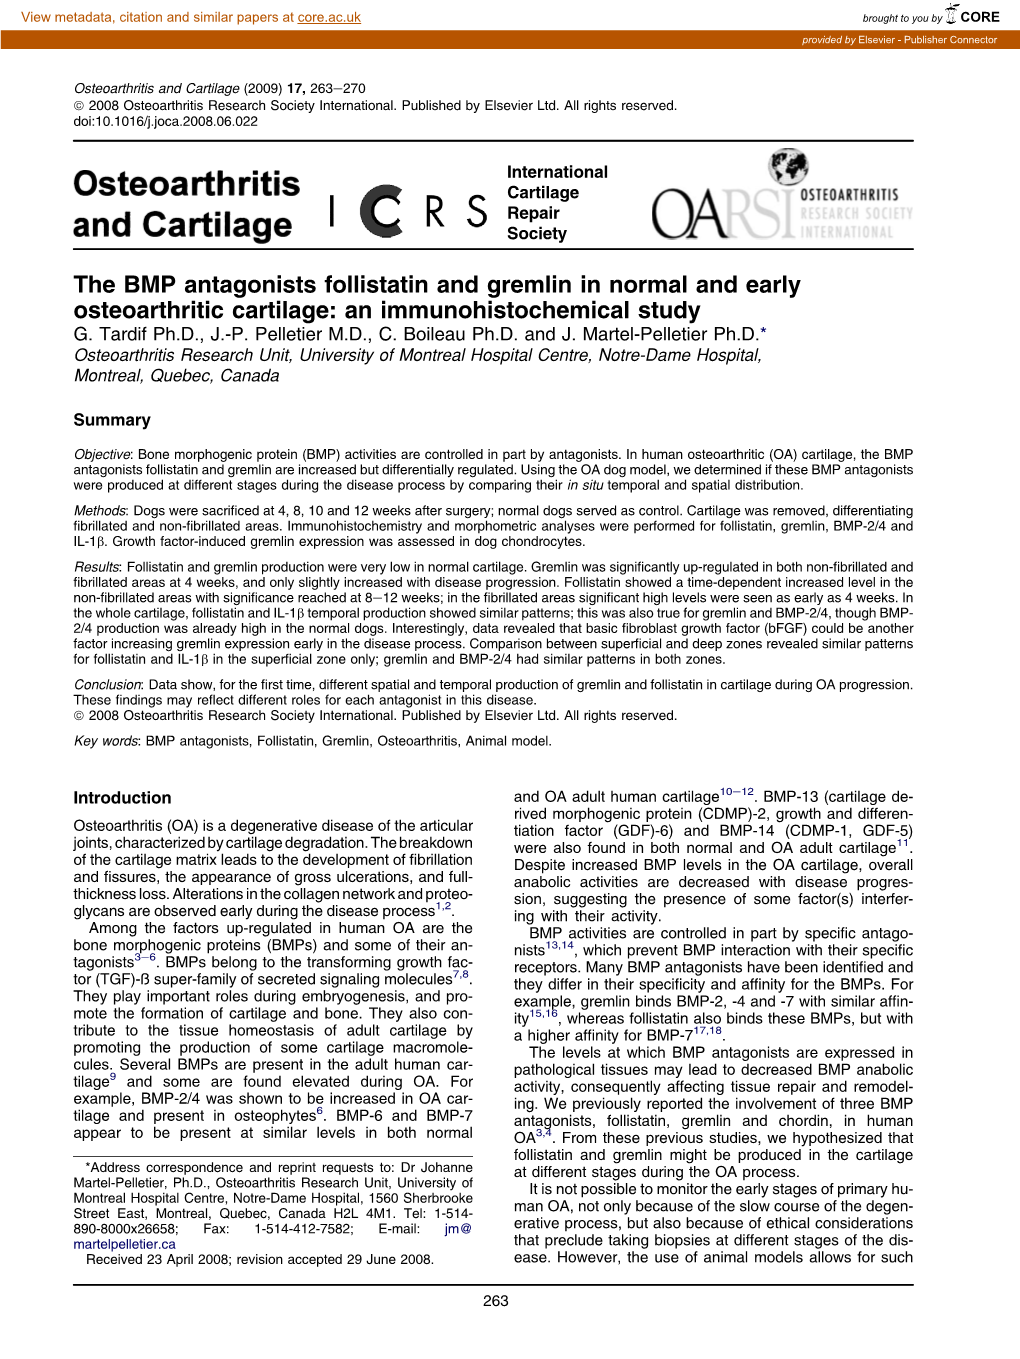 The BMP Antagonists Follistatin and Gremlin in Normal and Early Osteoarthritic Cartilage: an Immunohistochemical Study G